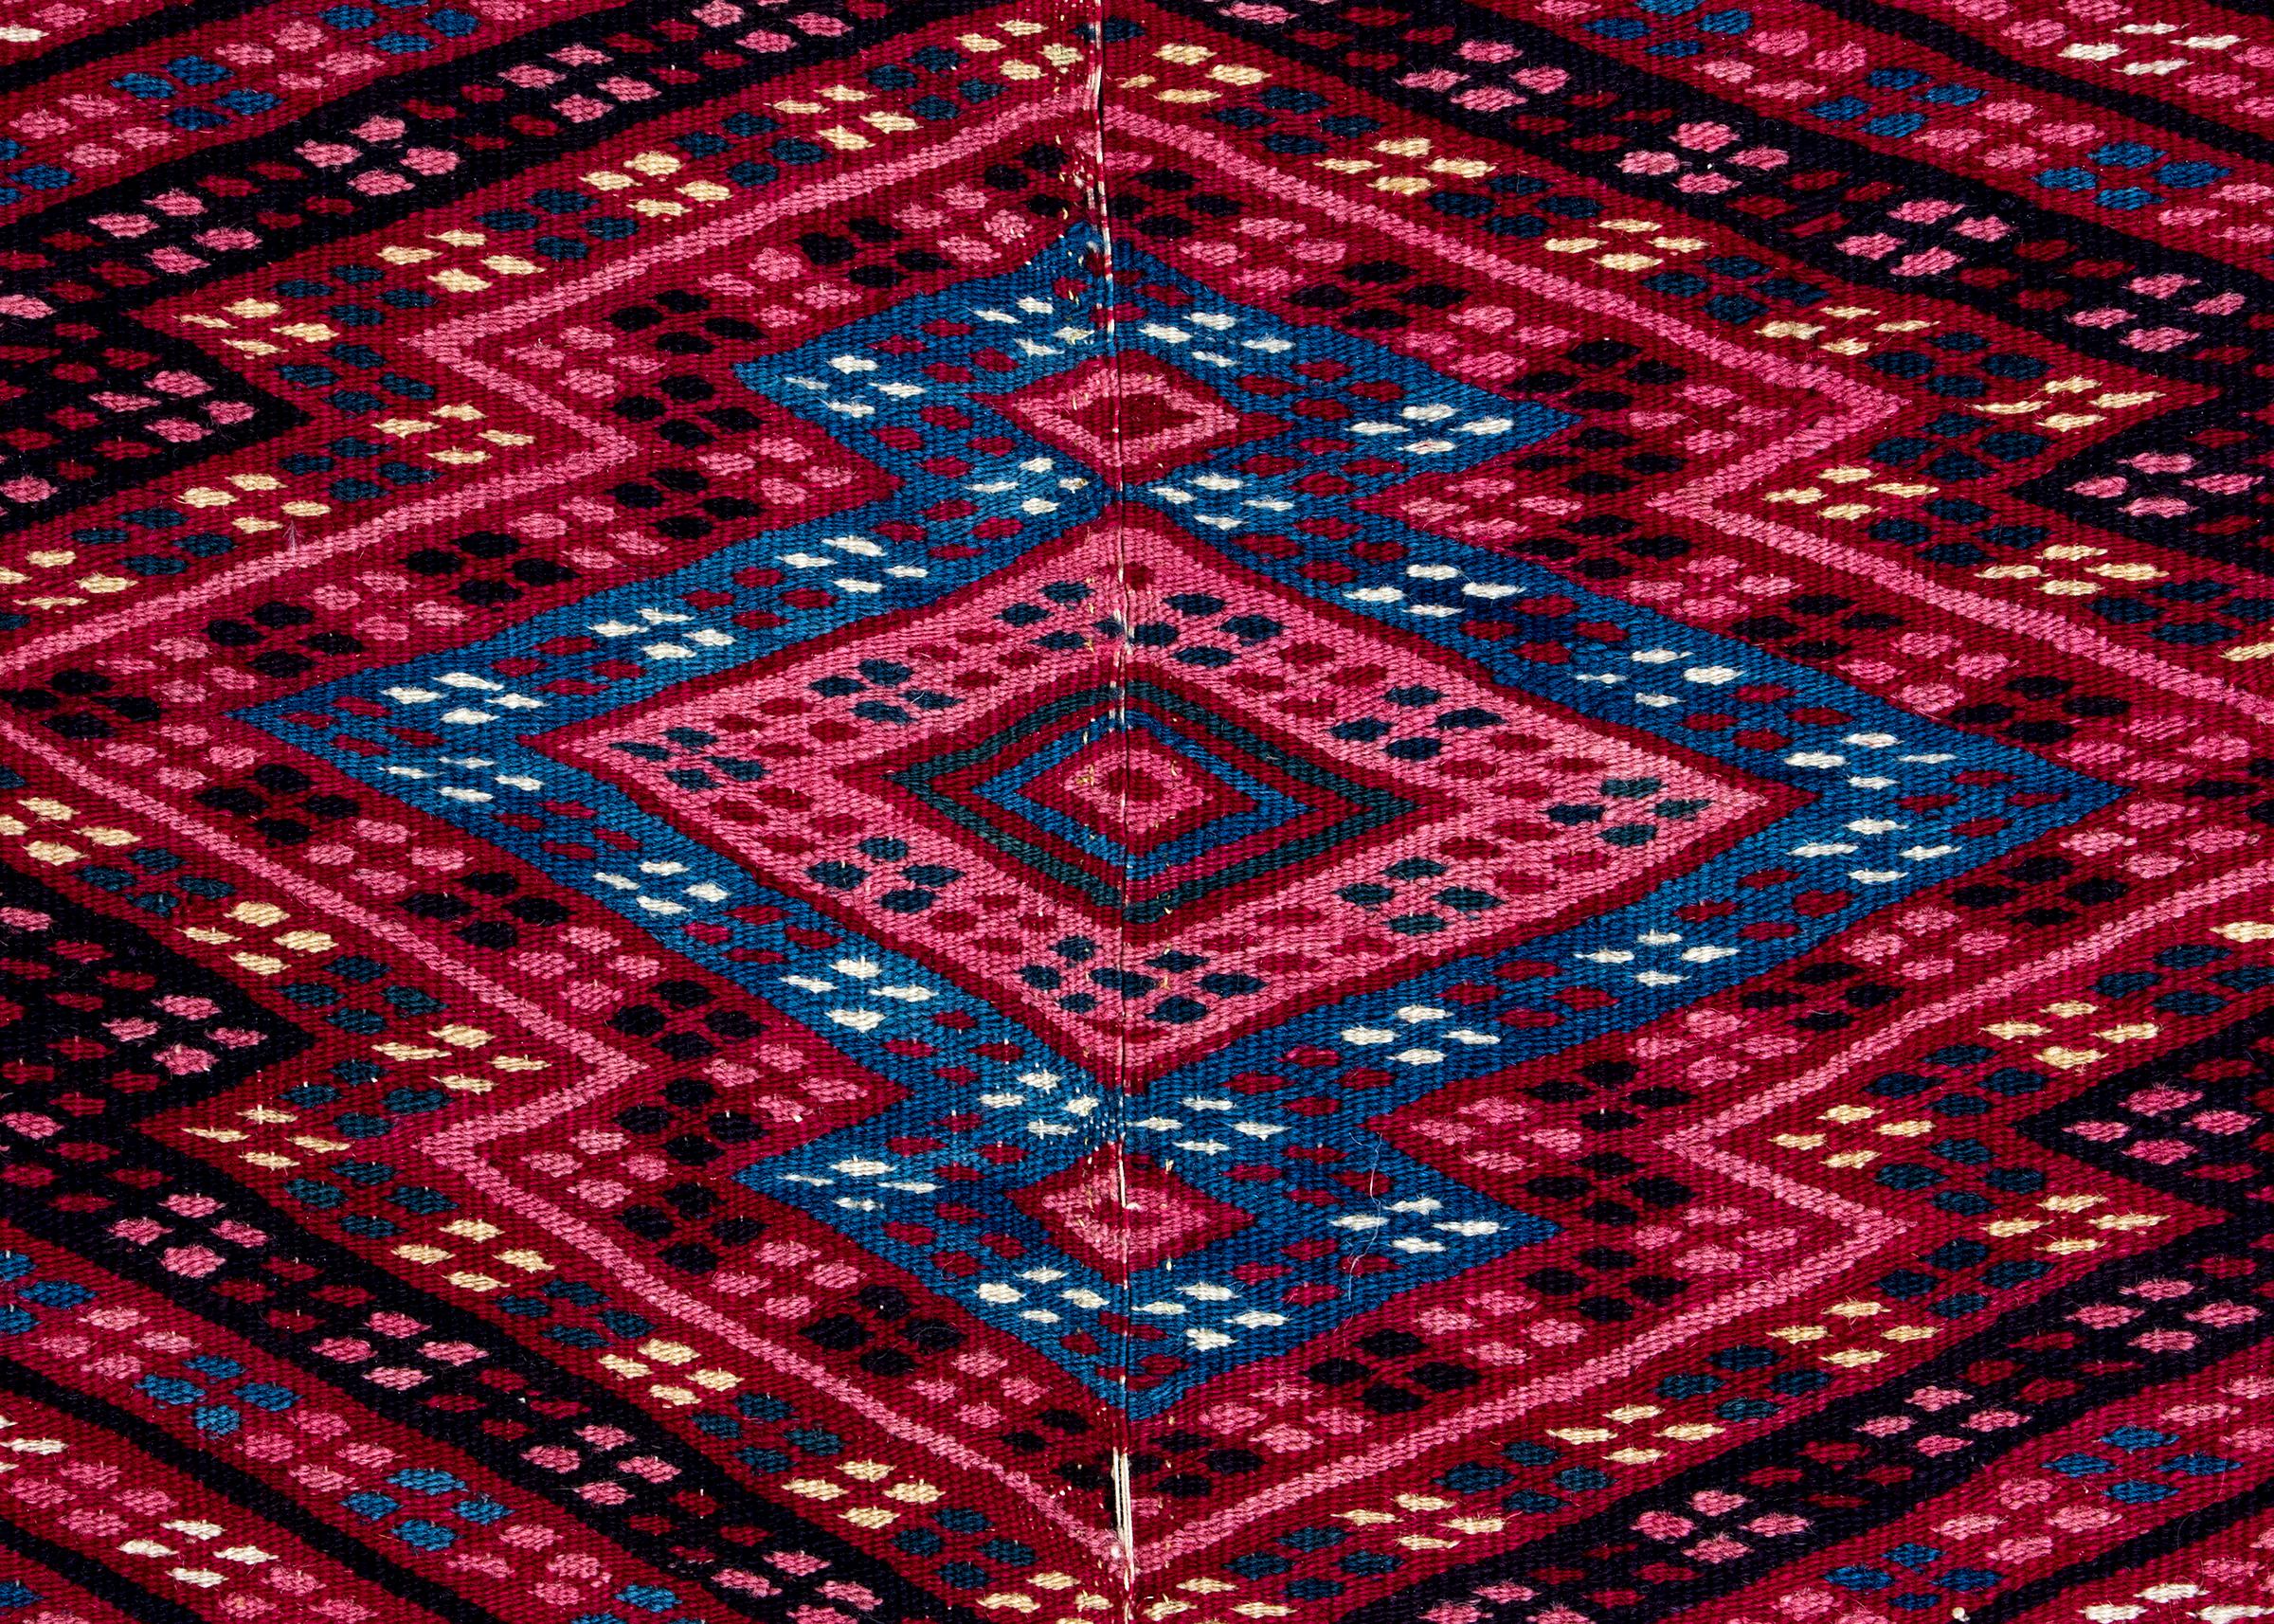 Mesoamerican Saltillo Serape transitional textile from 1850, made of wool with natural dyes in red, pink, blue, white and black. Presented securely mounted, outer dimensions measure 97 x 48 inches.

Weaving is clean and in very good